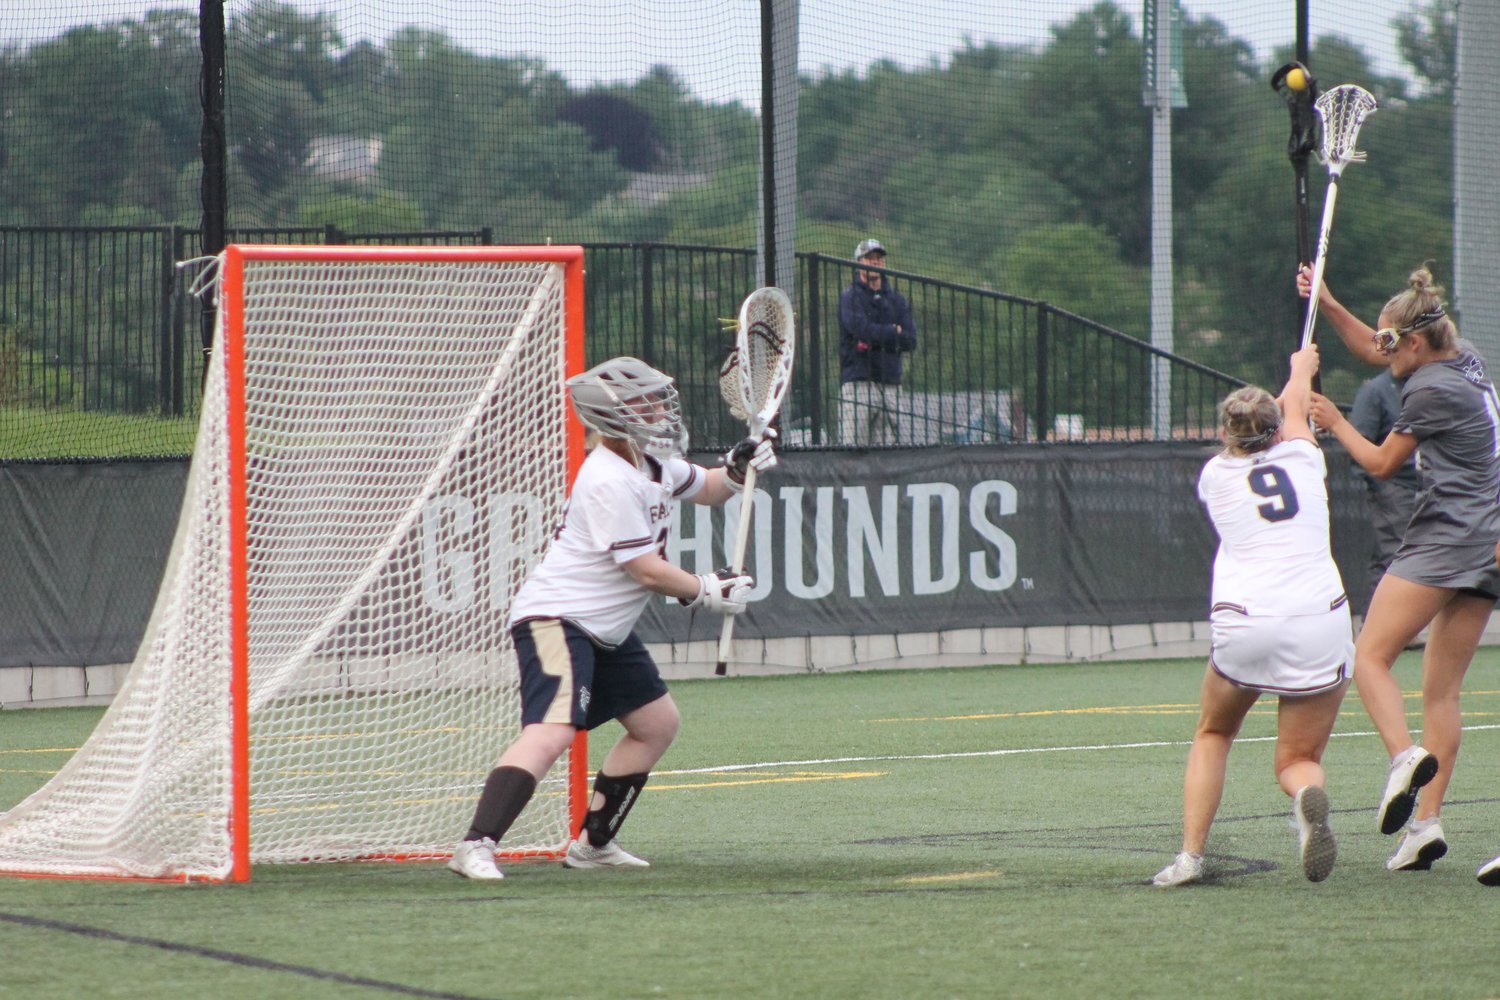 Goalie Sarah Krause prepared for an incoming shot from the Mustangs’ Maisy Clevenger. This shot missed over the crossbar.